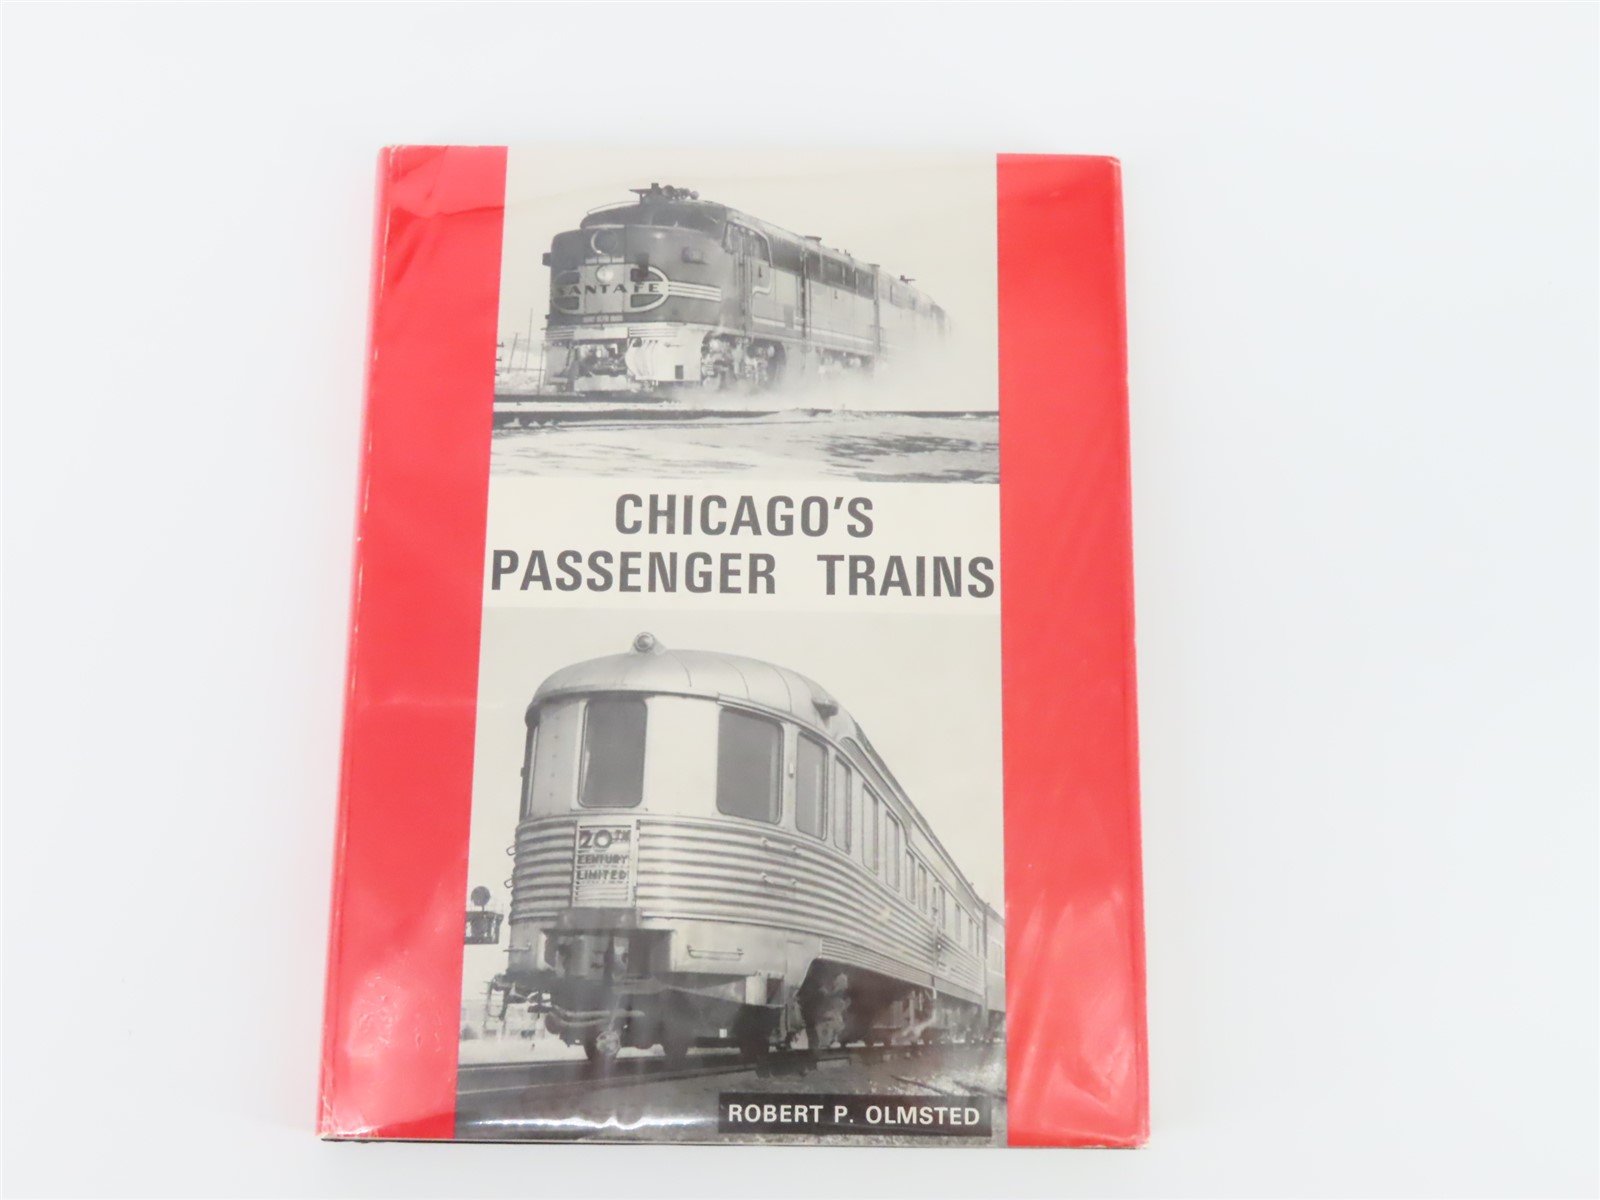 Chicago's Passenger Trains by Robert P. Olmsted ©1982 HC Book